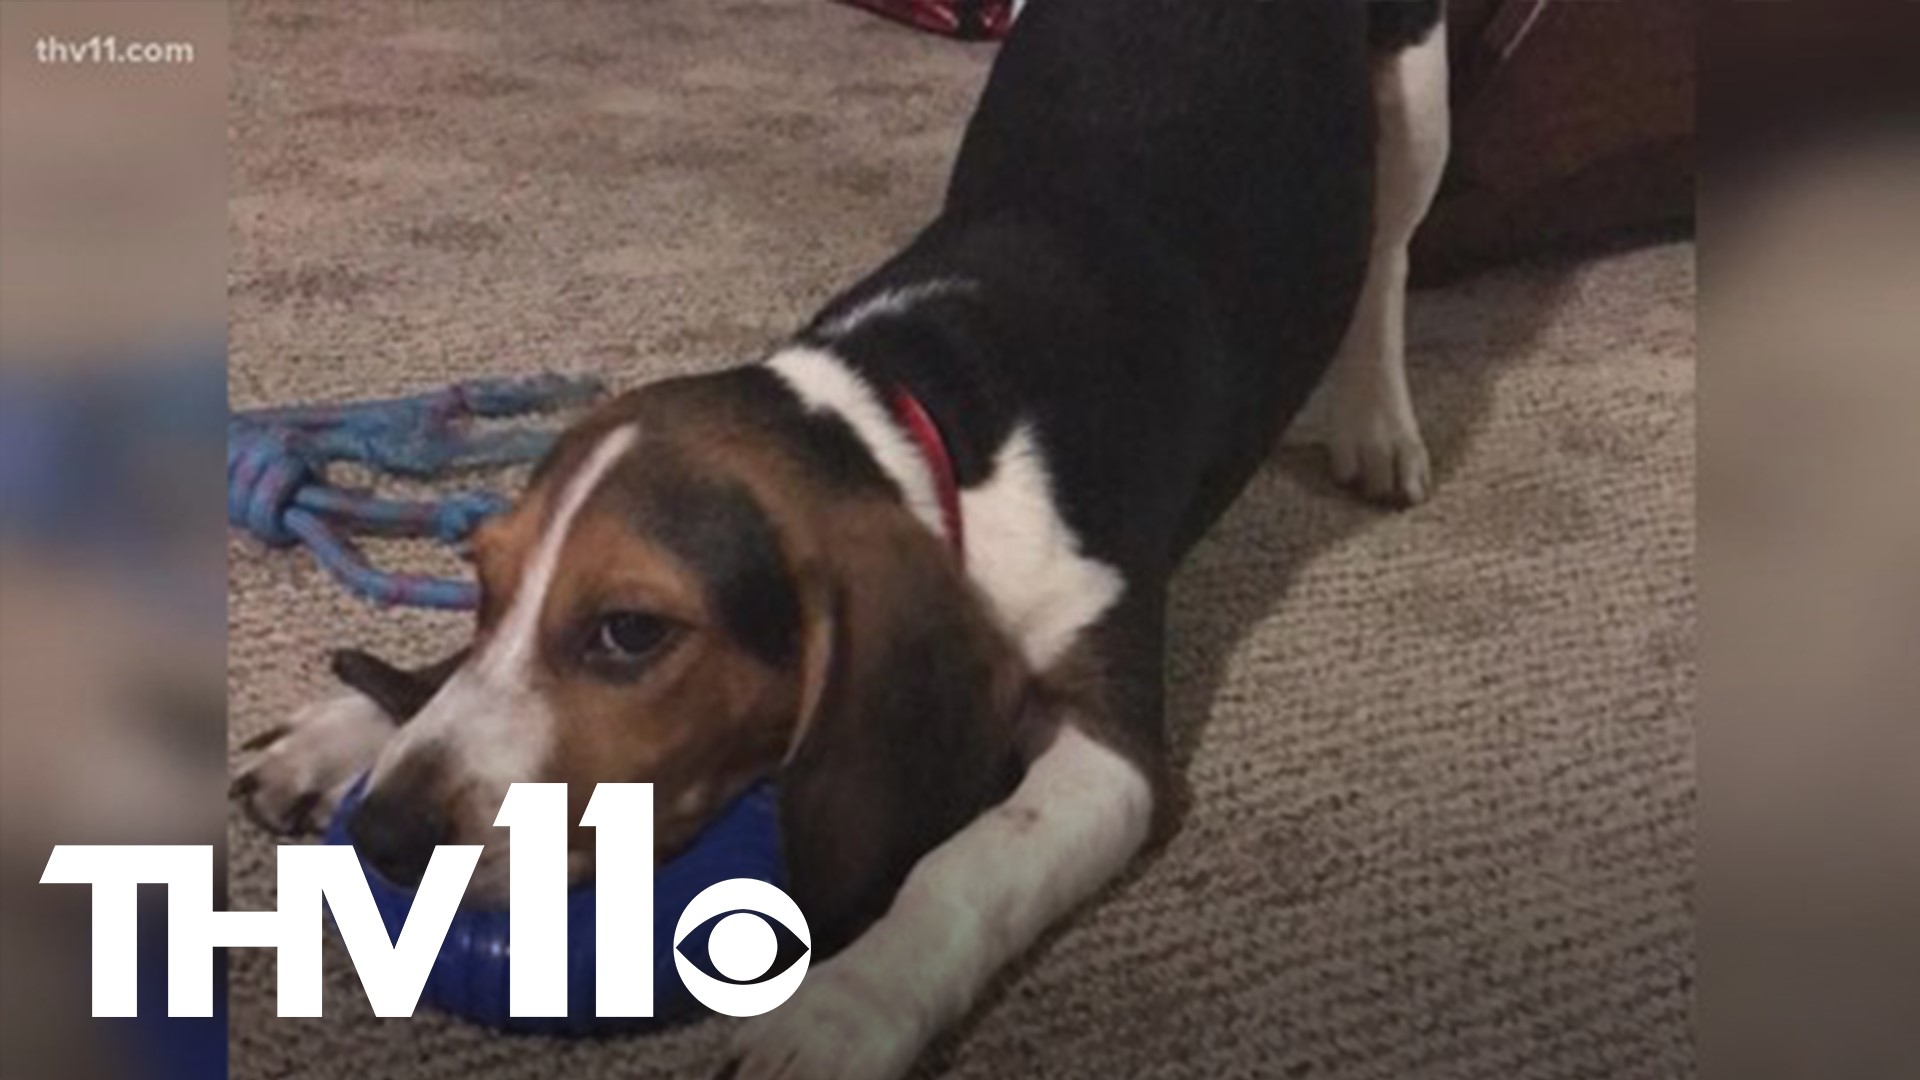 Nearly two months after an Arkansas family's beagle went missing, he has been found 1,000 miles away in Florida!